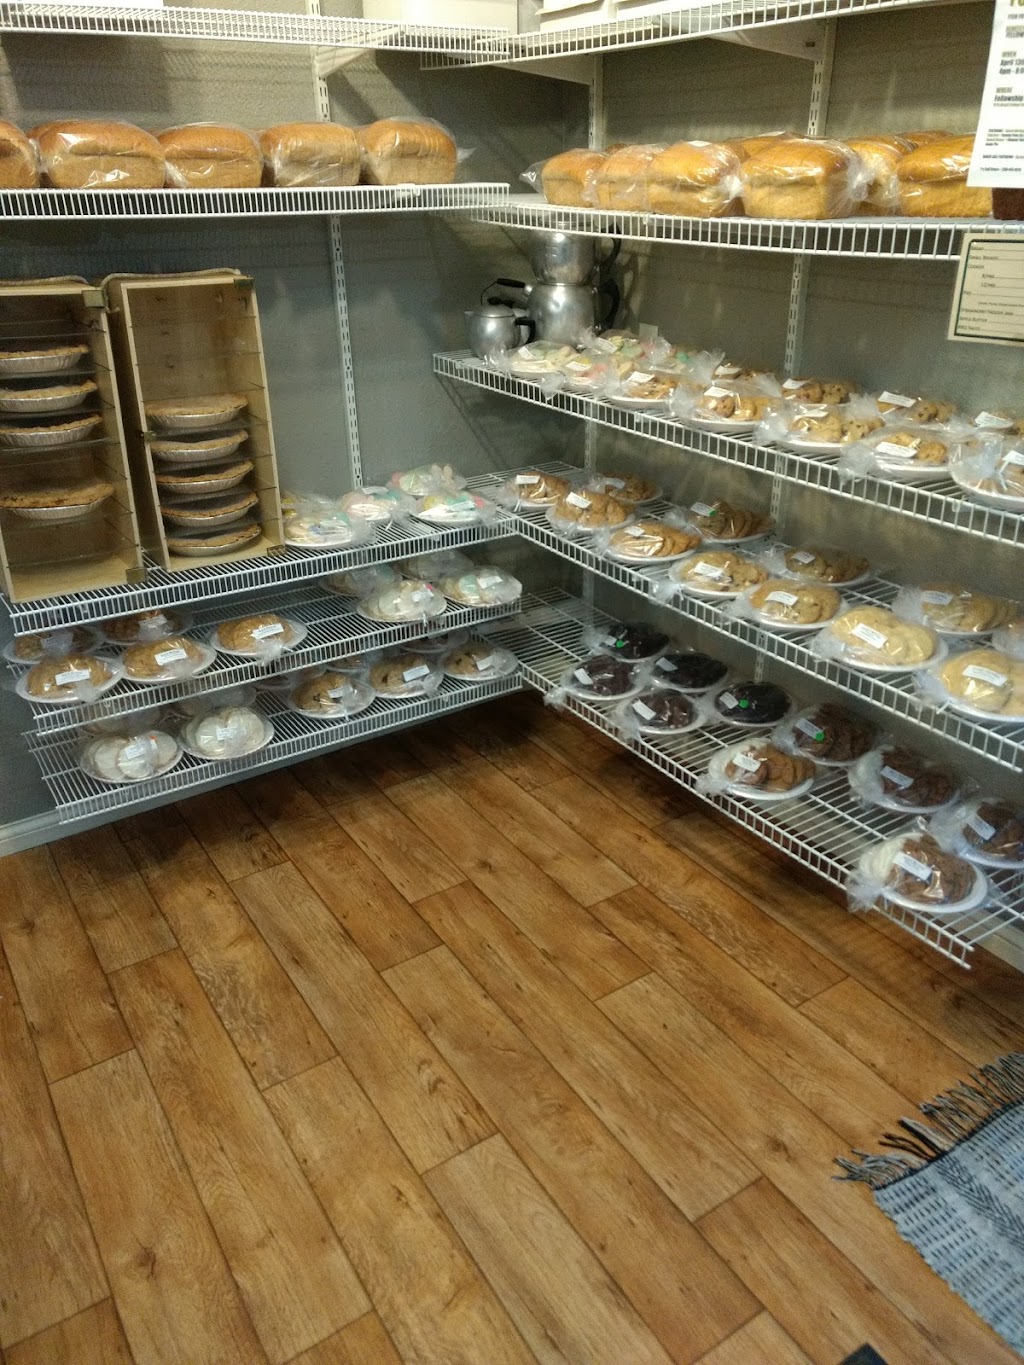 Dutch Heritage Baking and Catering - bakery  | Photo 4 of 10 | Address: 5427 Co Rd 68, Spencerville, IN 46788, USA | Phone: (260) 238-4304